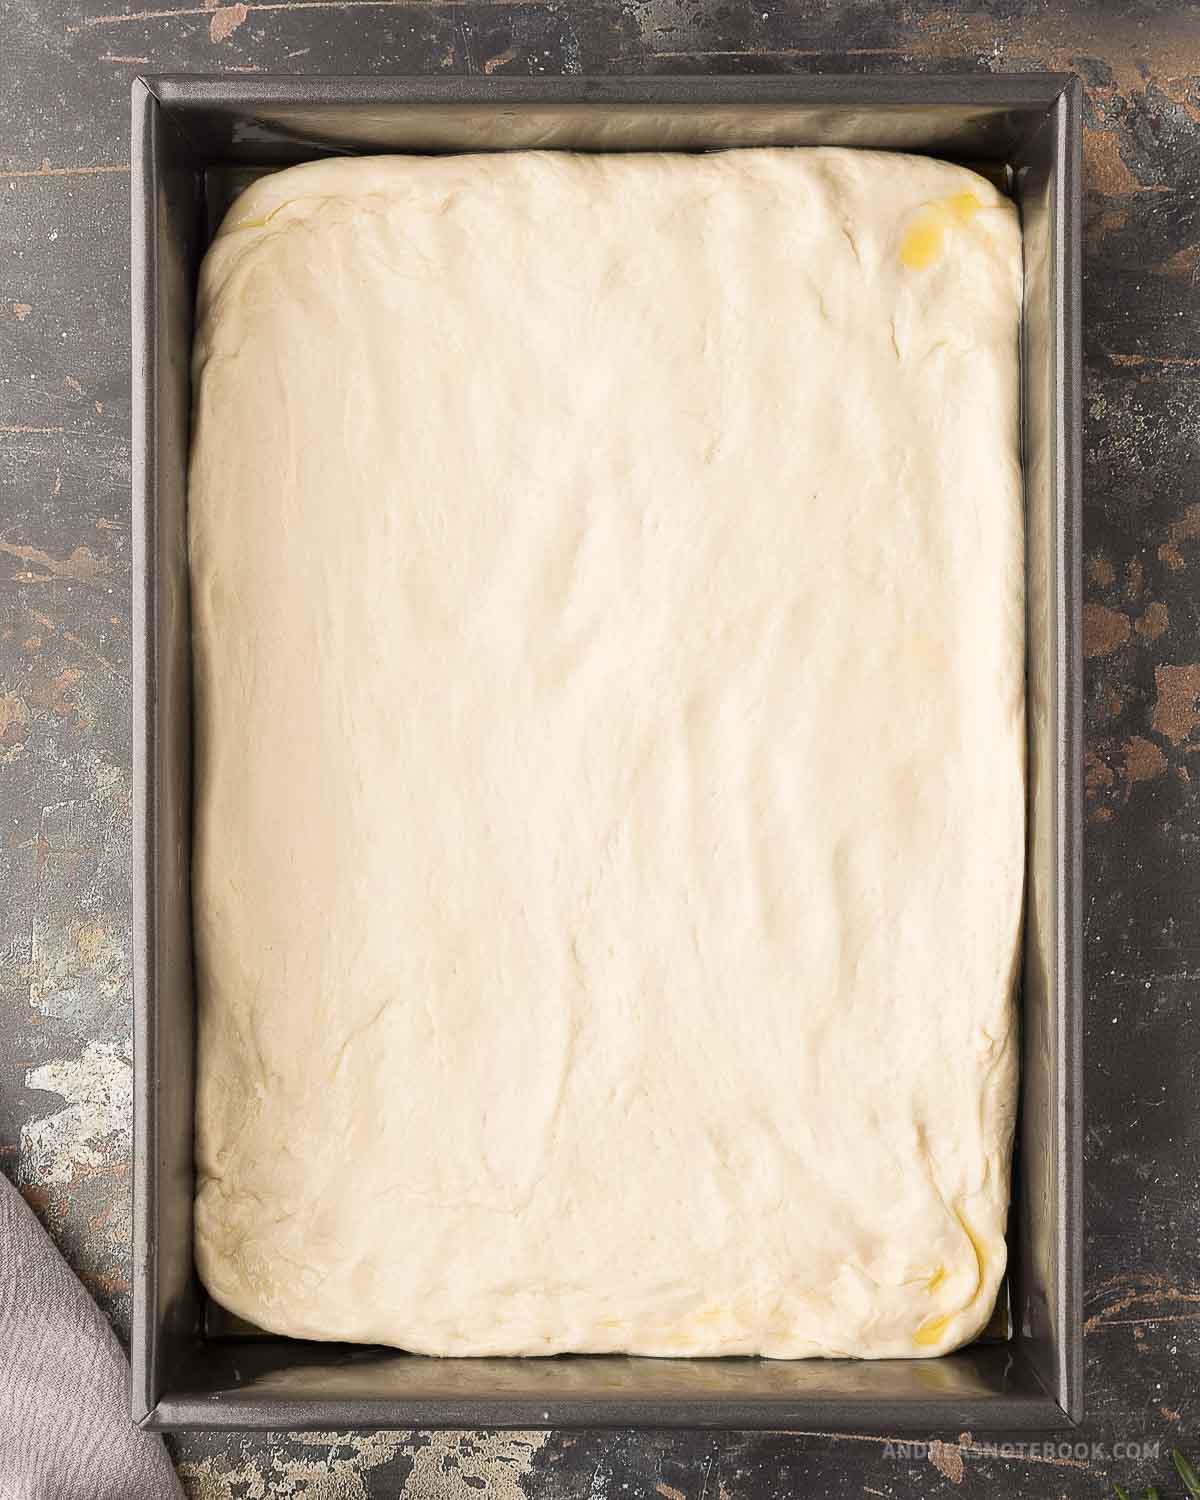 dough spread to cover bottom of baking dish.